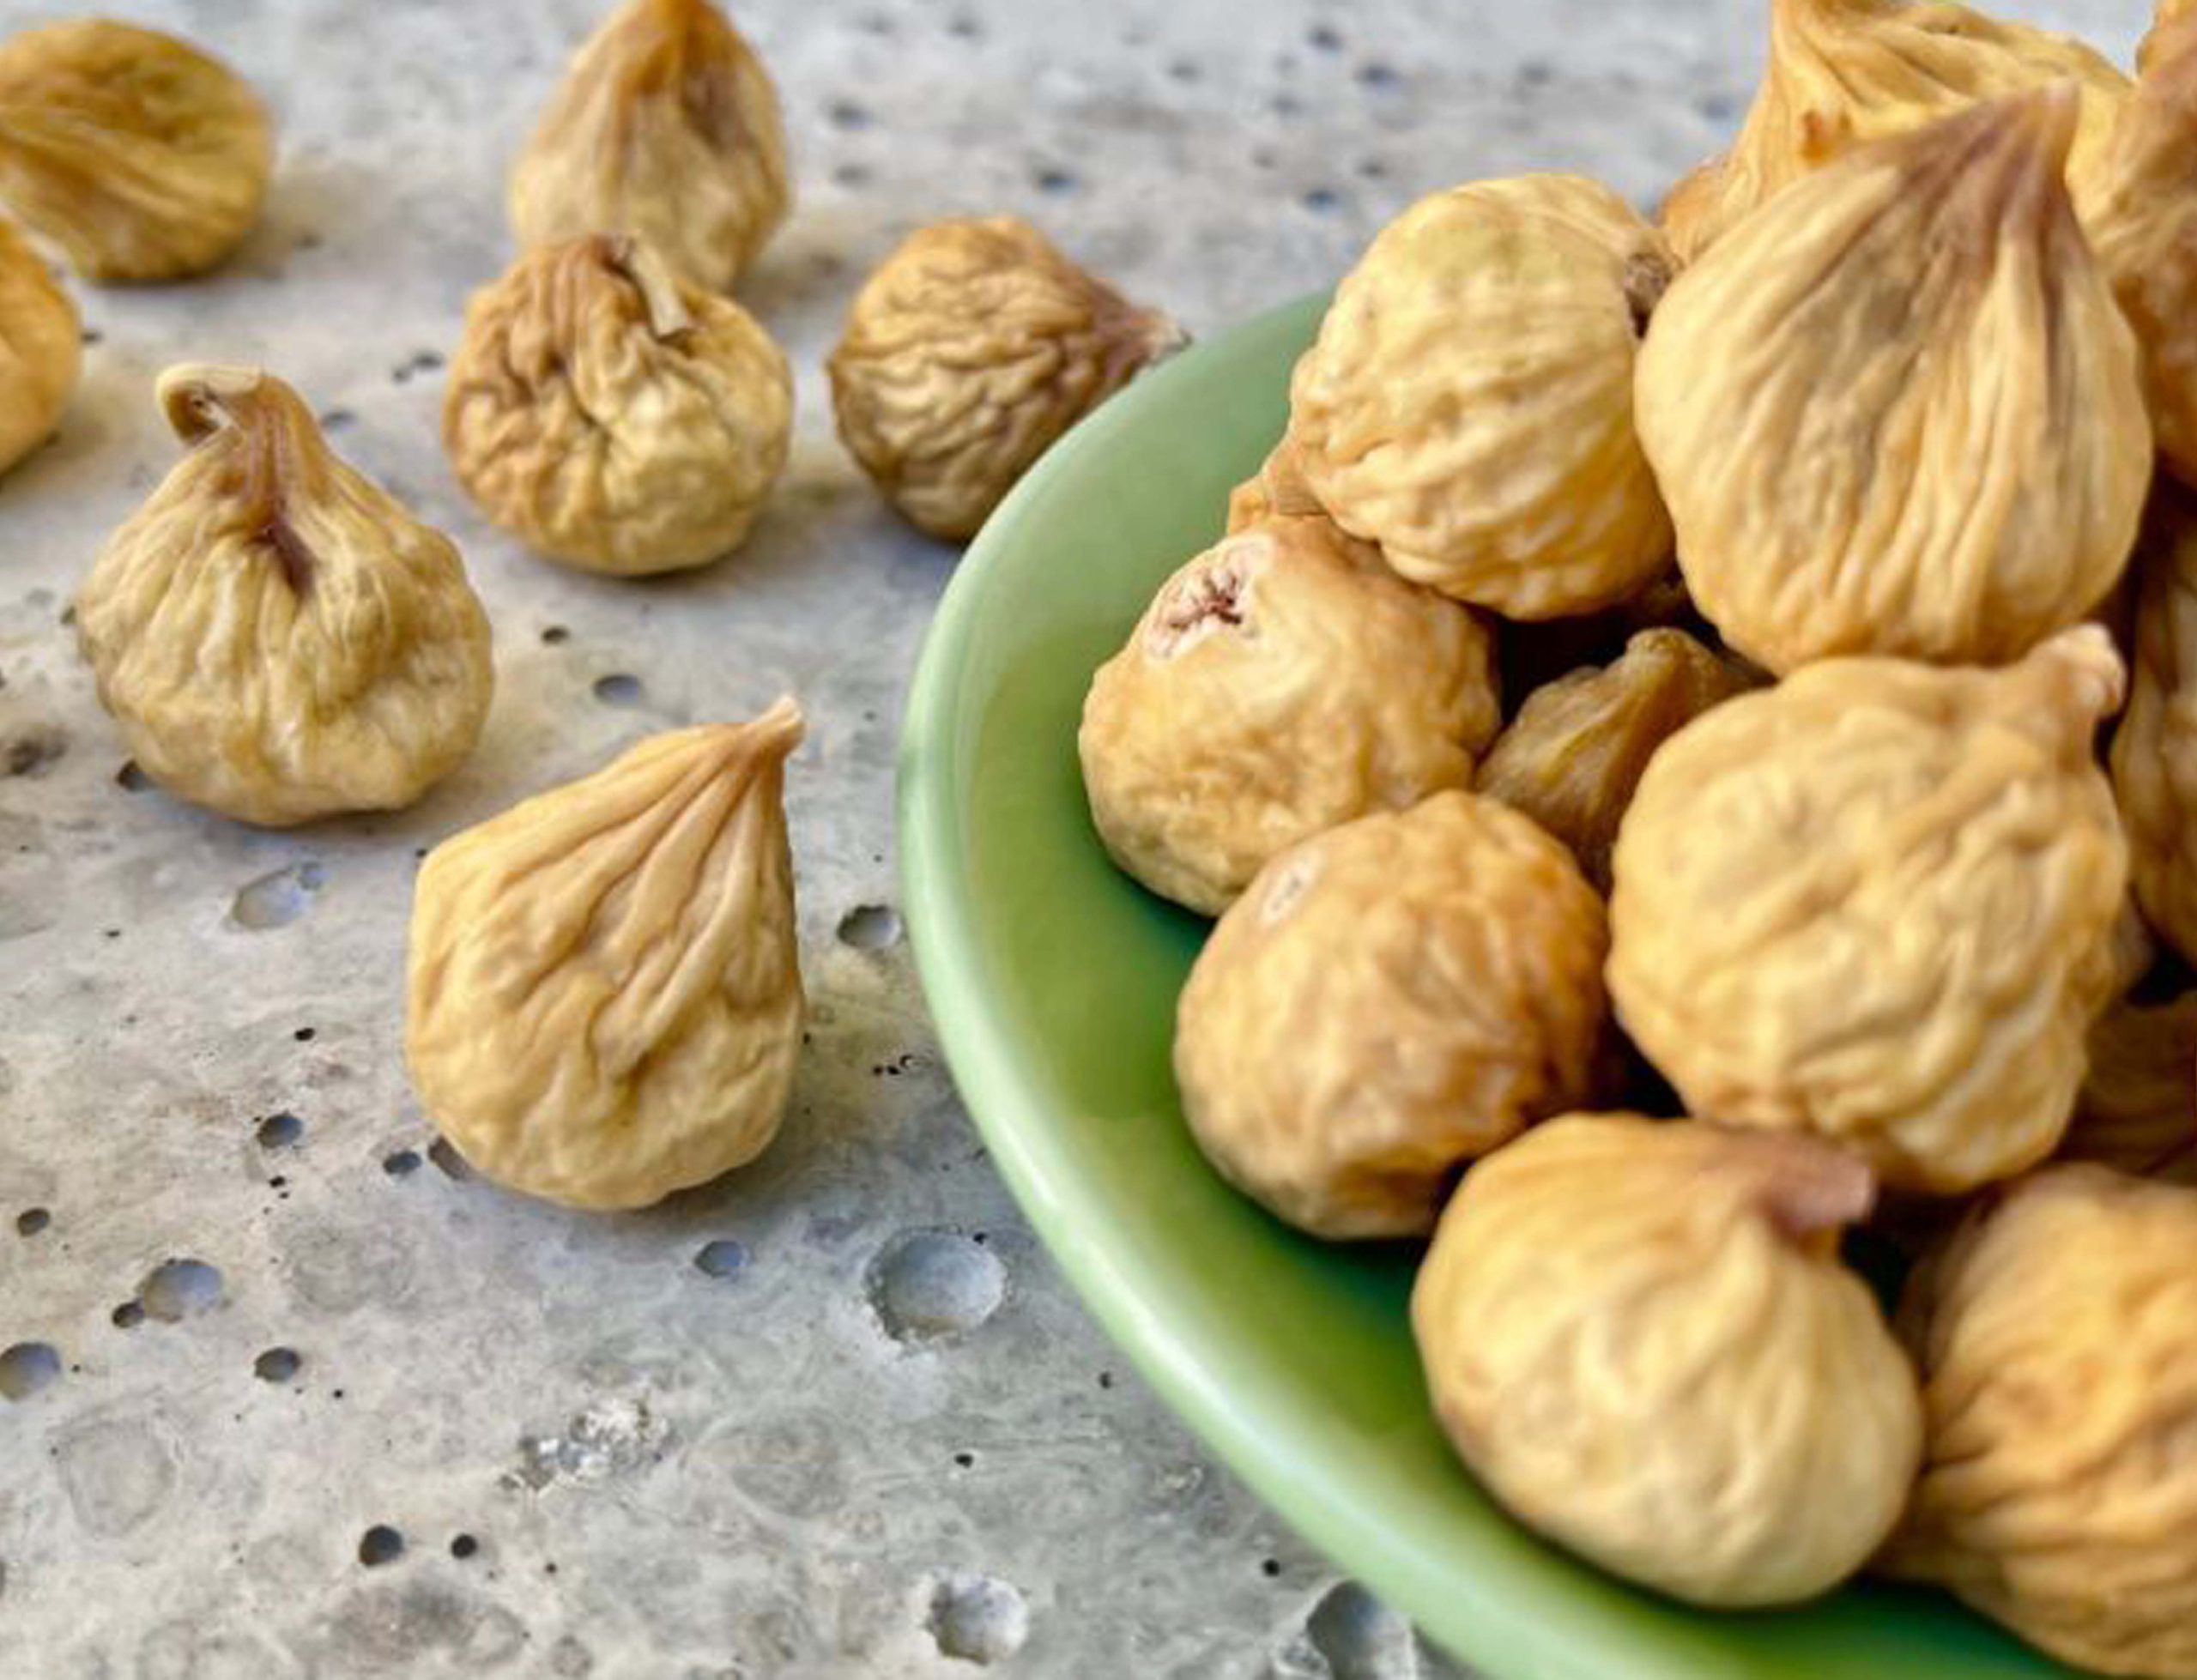 Where can we buy dried figs at a cheaper price?